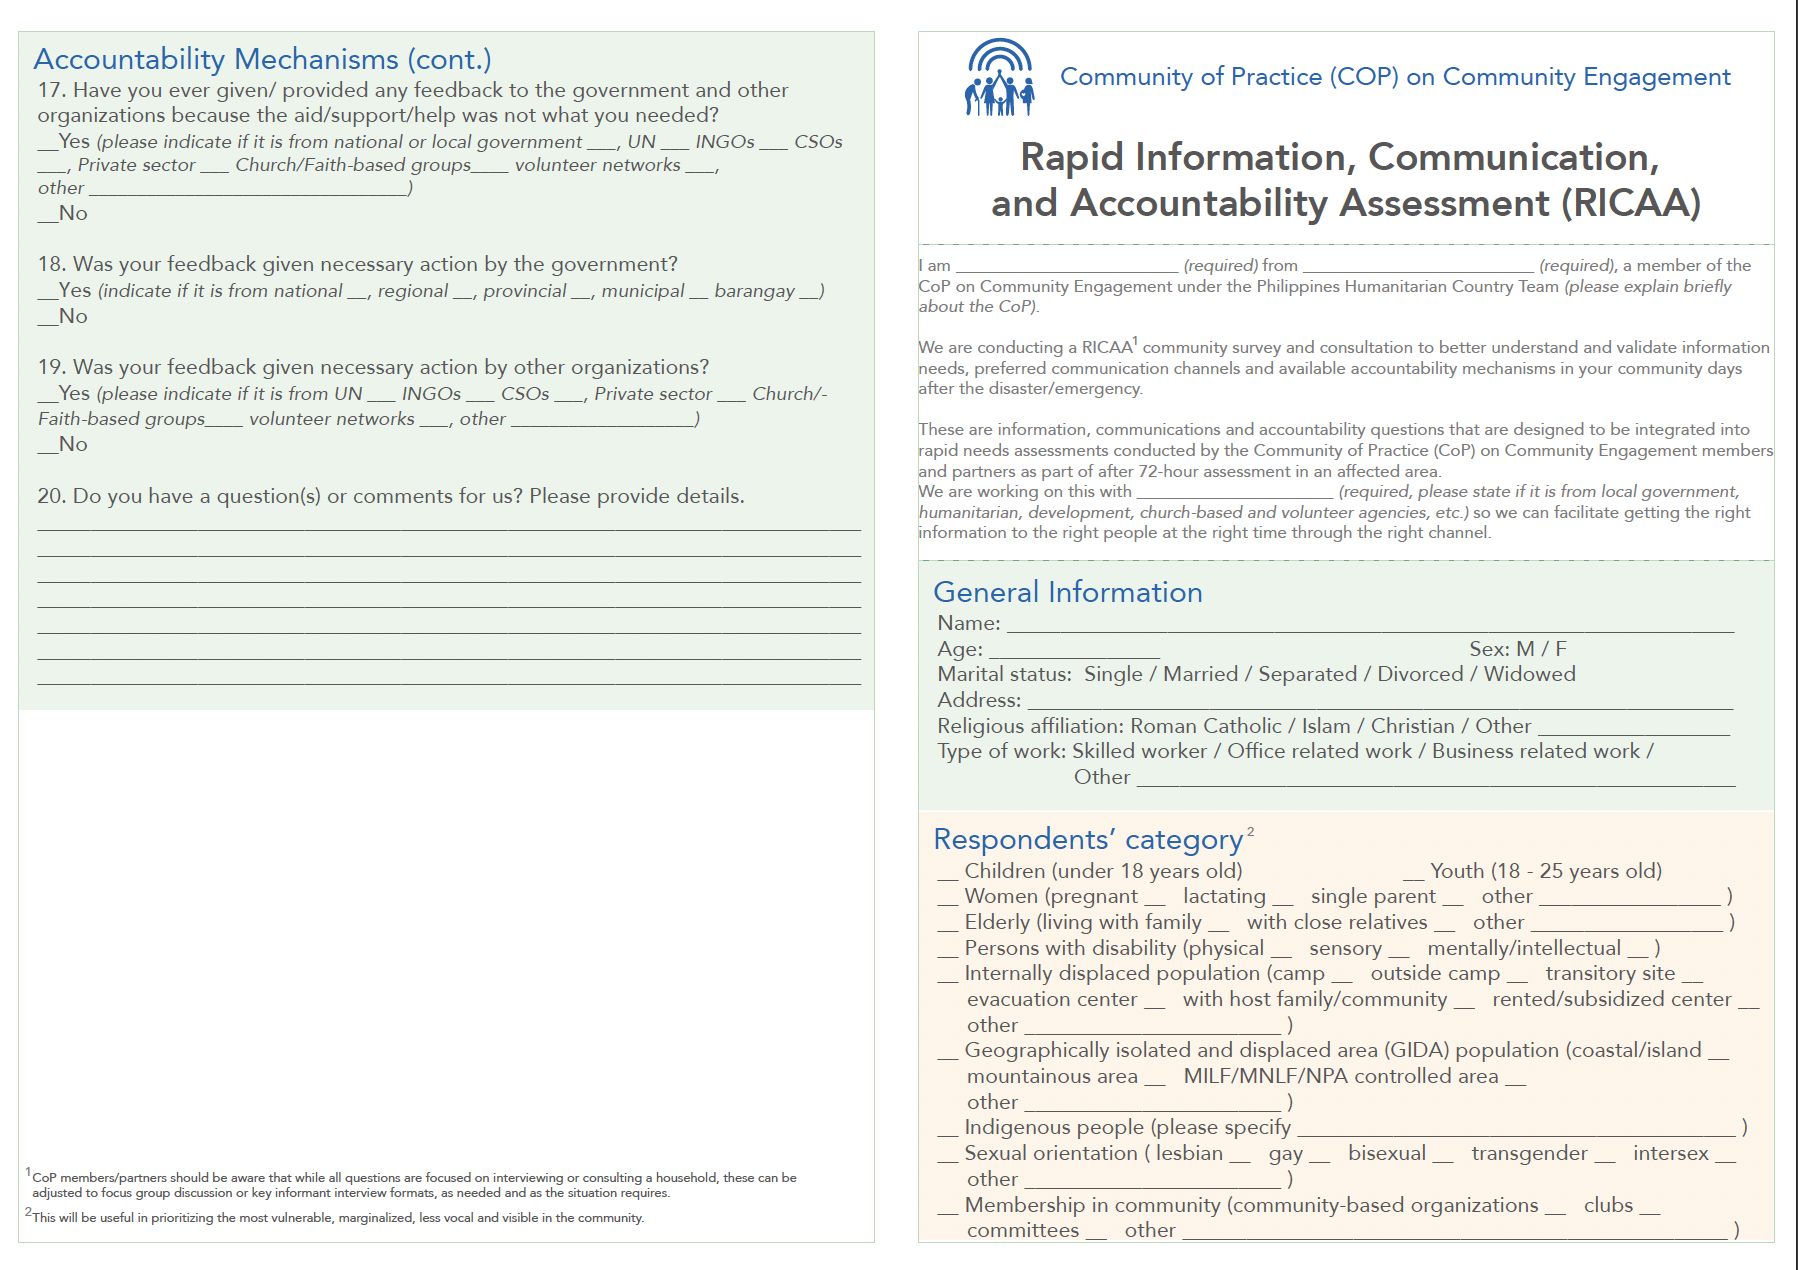 Rapid information communications accountability assessment (RICAA) — CDAC Network image picture pic